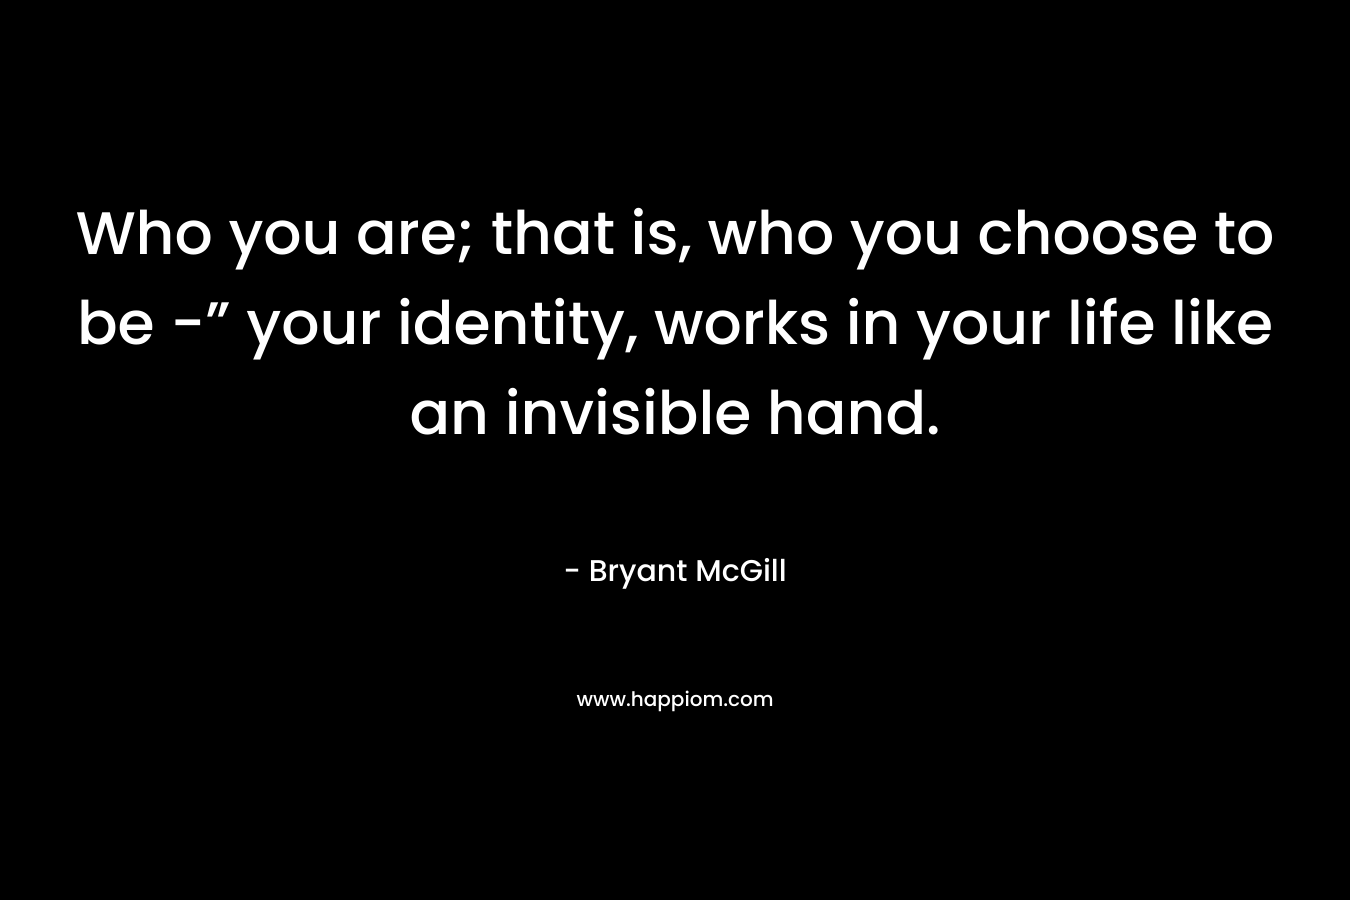 Who you are; that is, who you choose to be -” your identity, works in your life like an invisible hand. – Bryant McGill